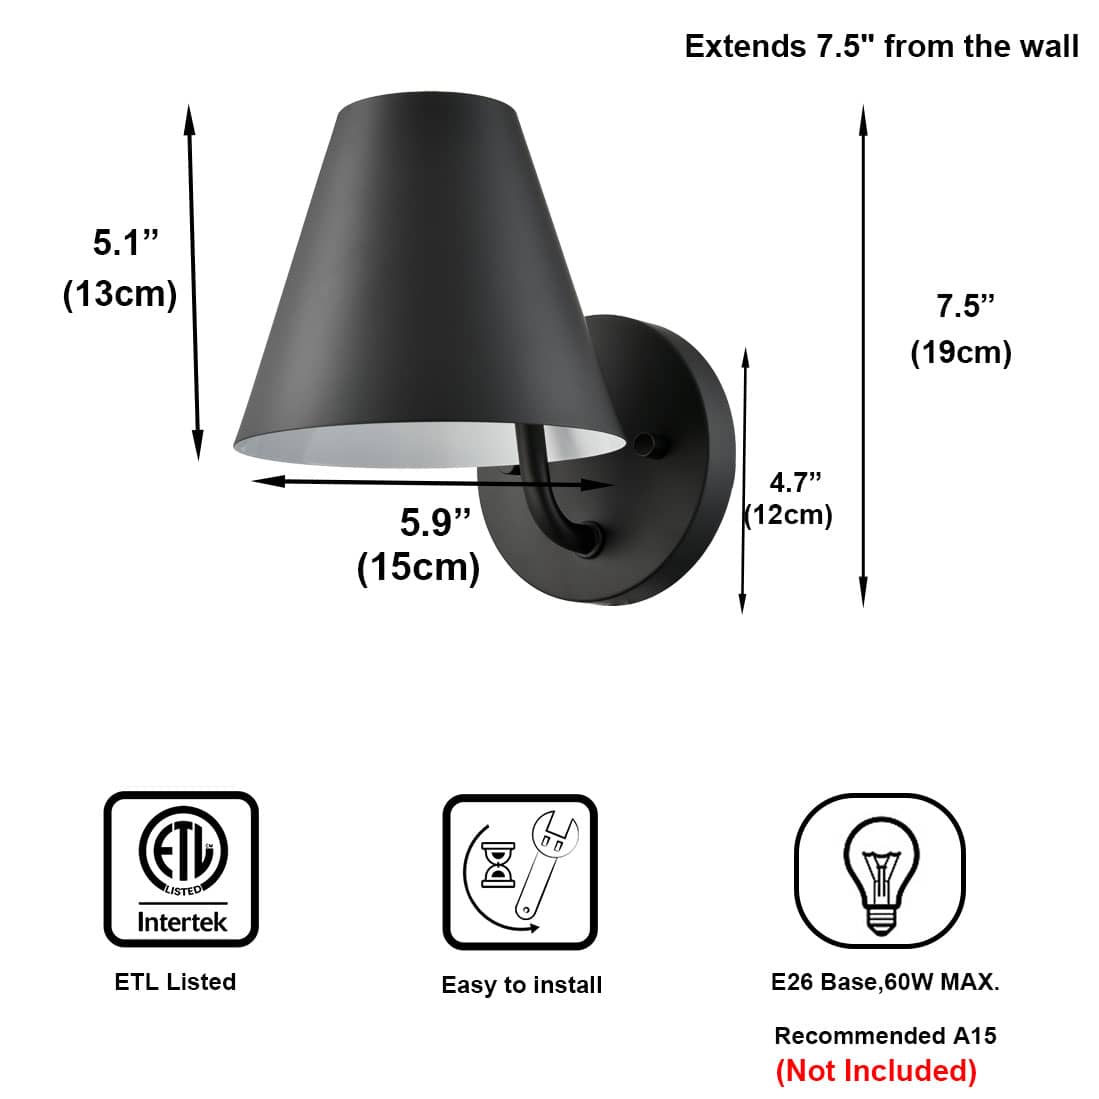 Industrial Wall Light for Bedroom Black Wall Sconce 